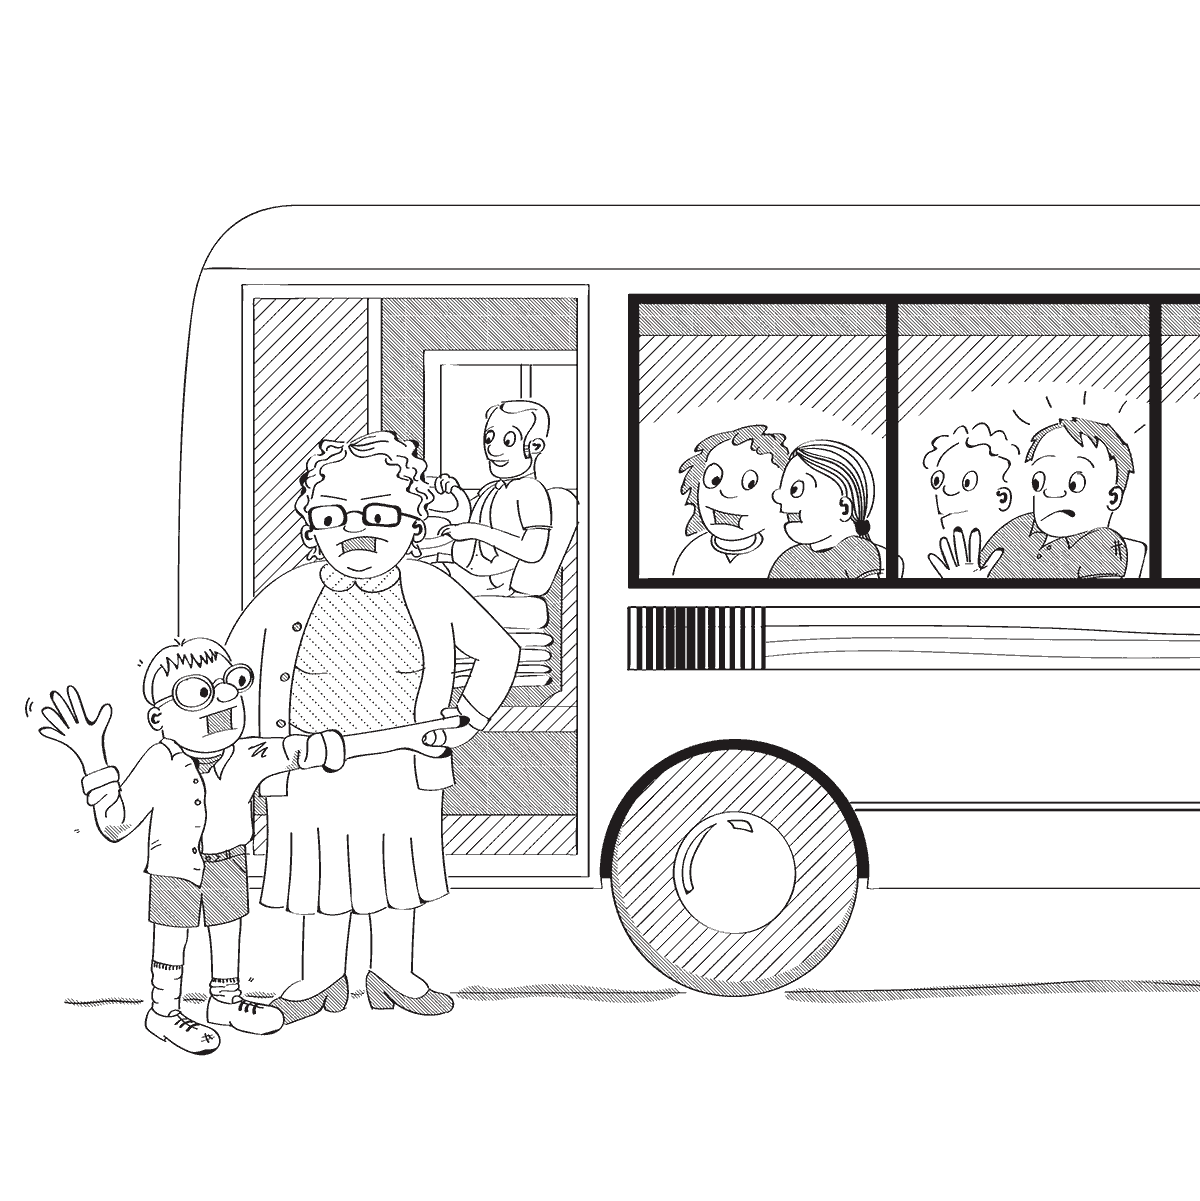 Illustration: Mrs Battleship stands by school bus door. Grubby kid next to her points to another student on the bus.